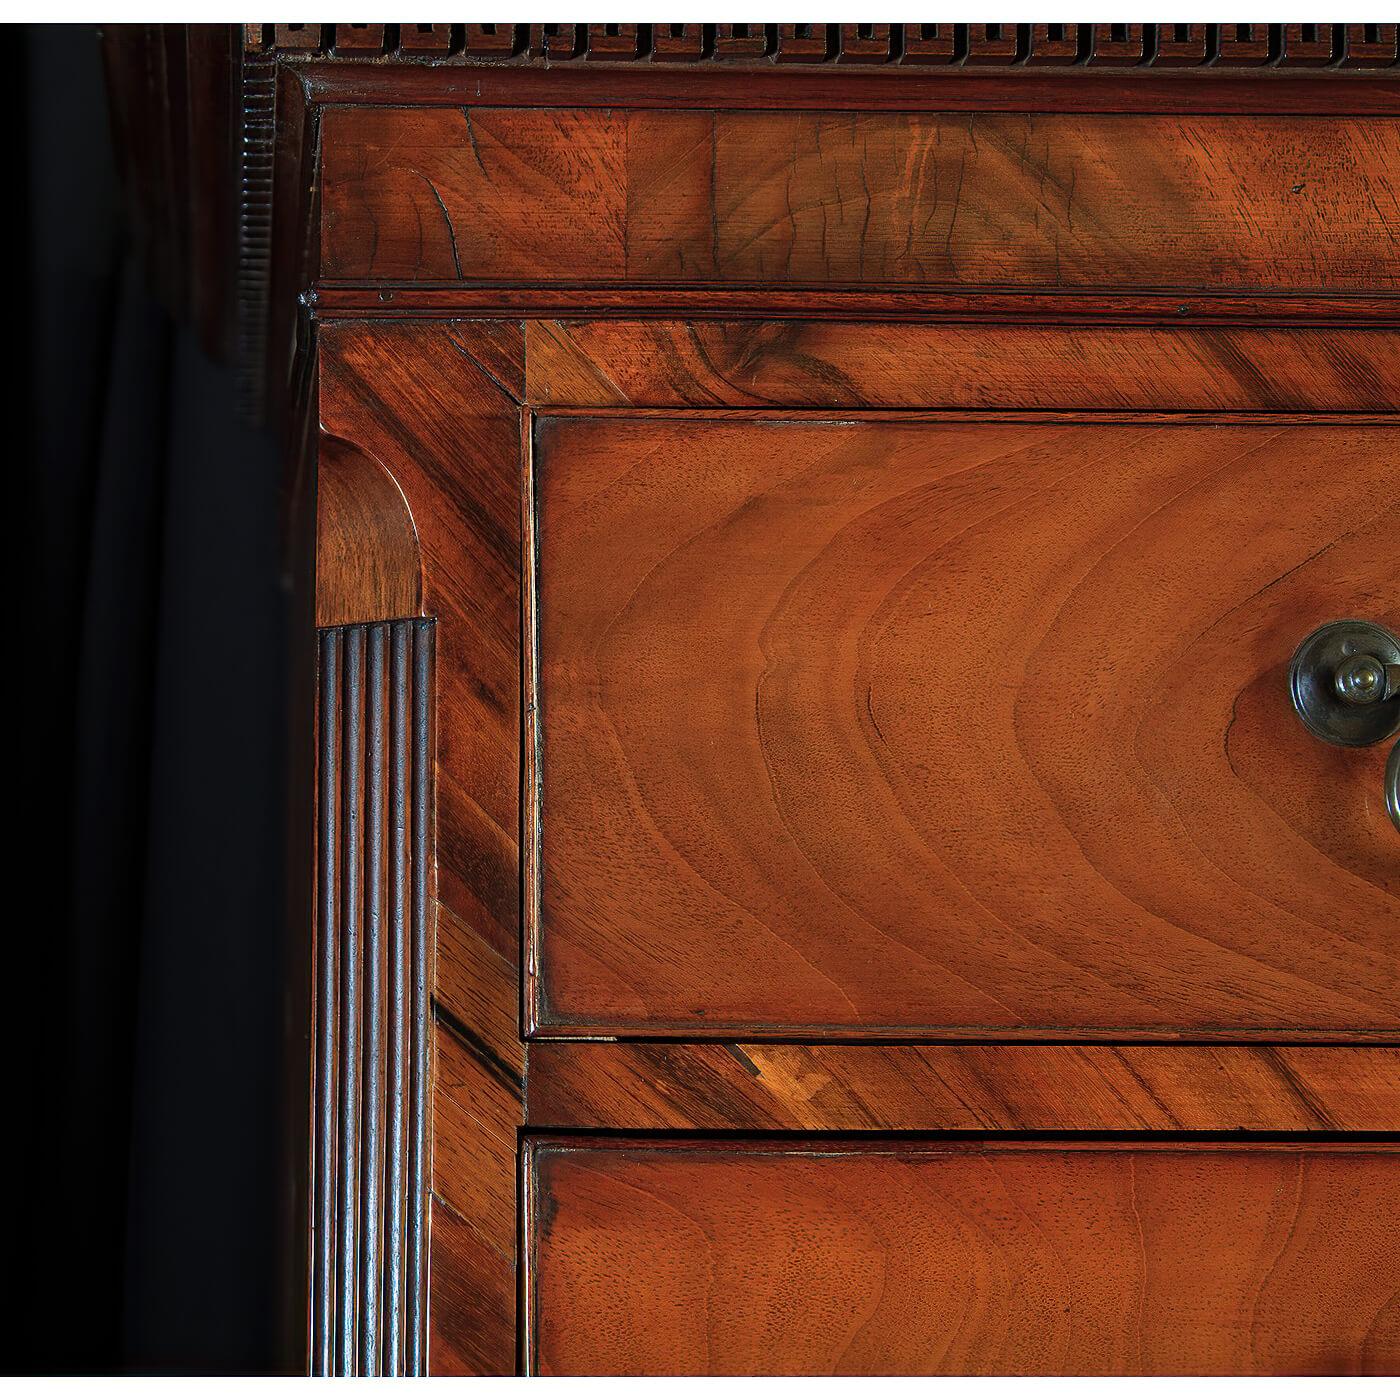 A Fine George II figured mahogany chest on chest with a carved dental molded top cornice, the top section with two split drawers over three graduated drawers, canted and fluted corners above a three graduated drawer lower section also has a brushing